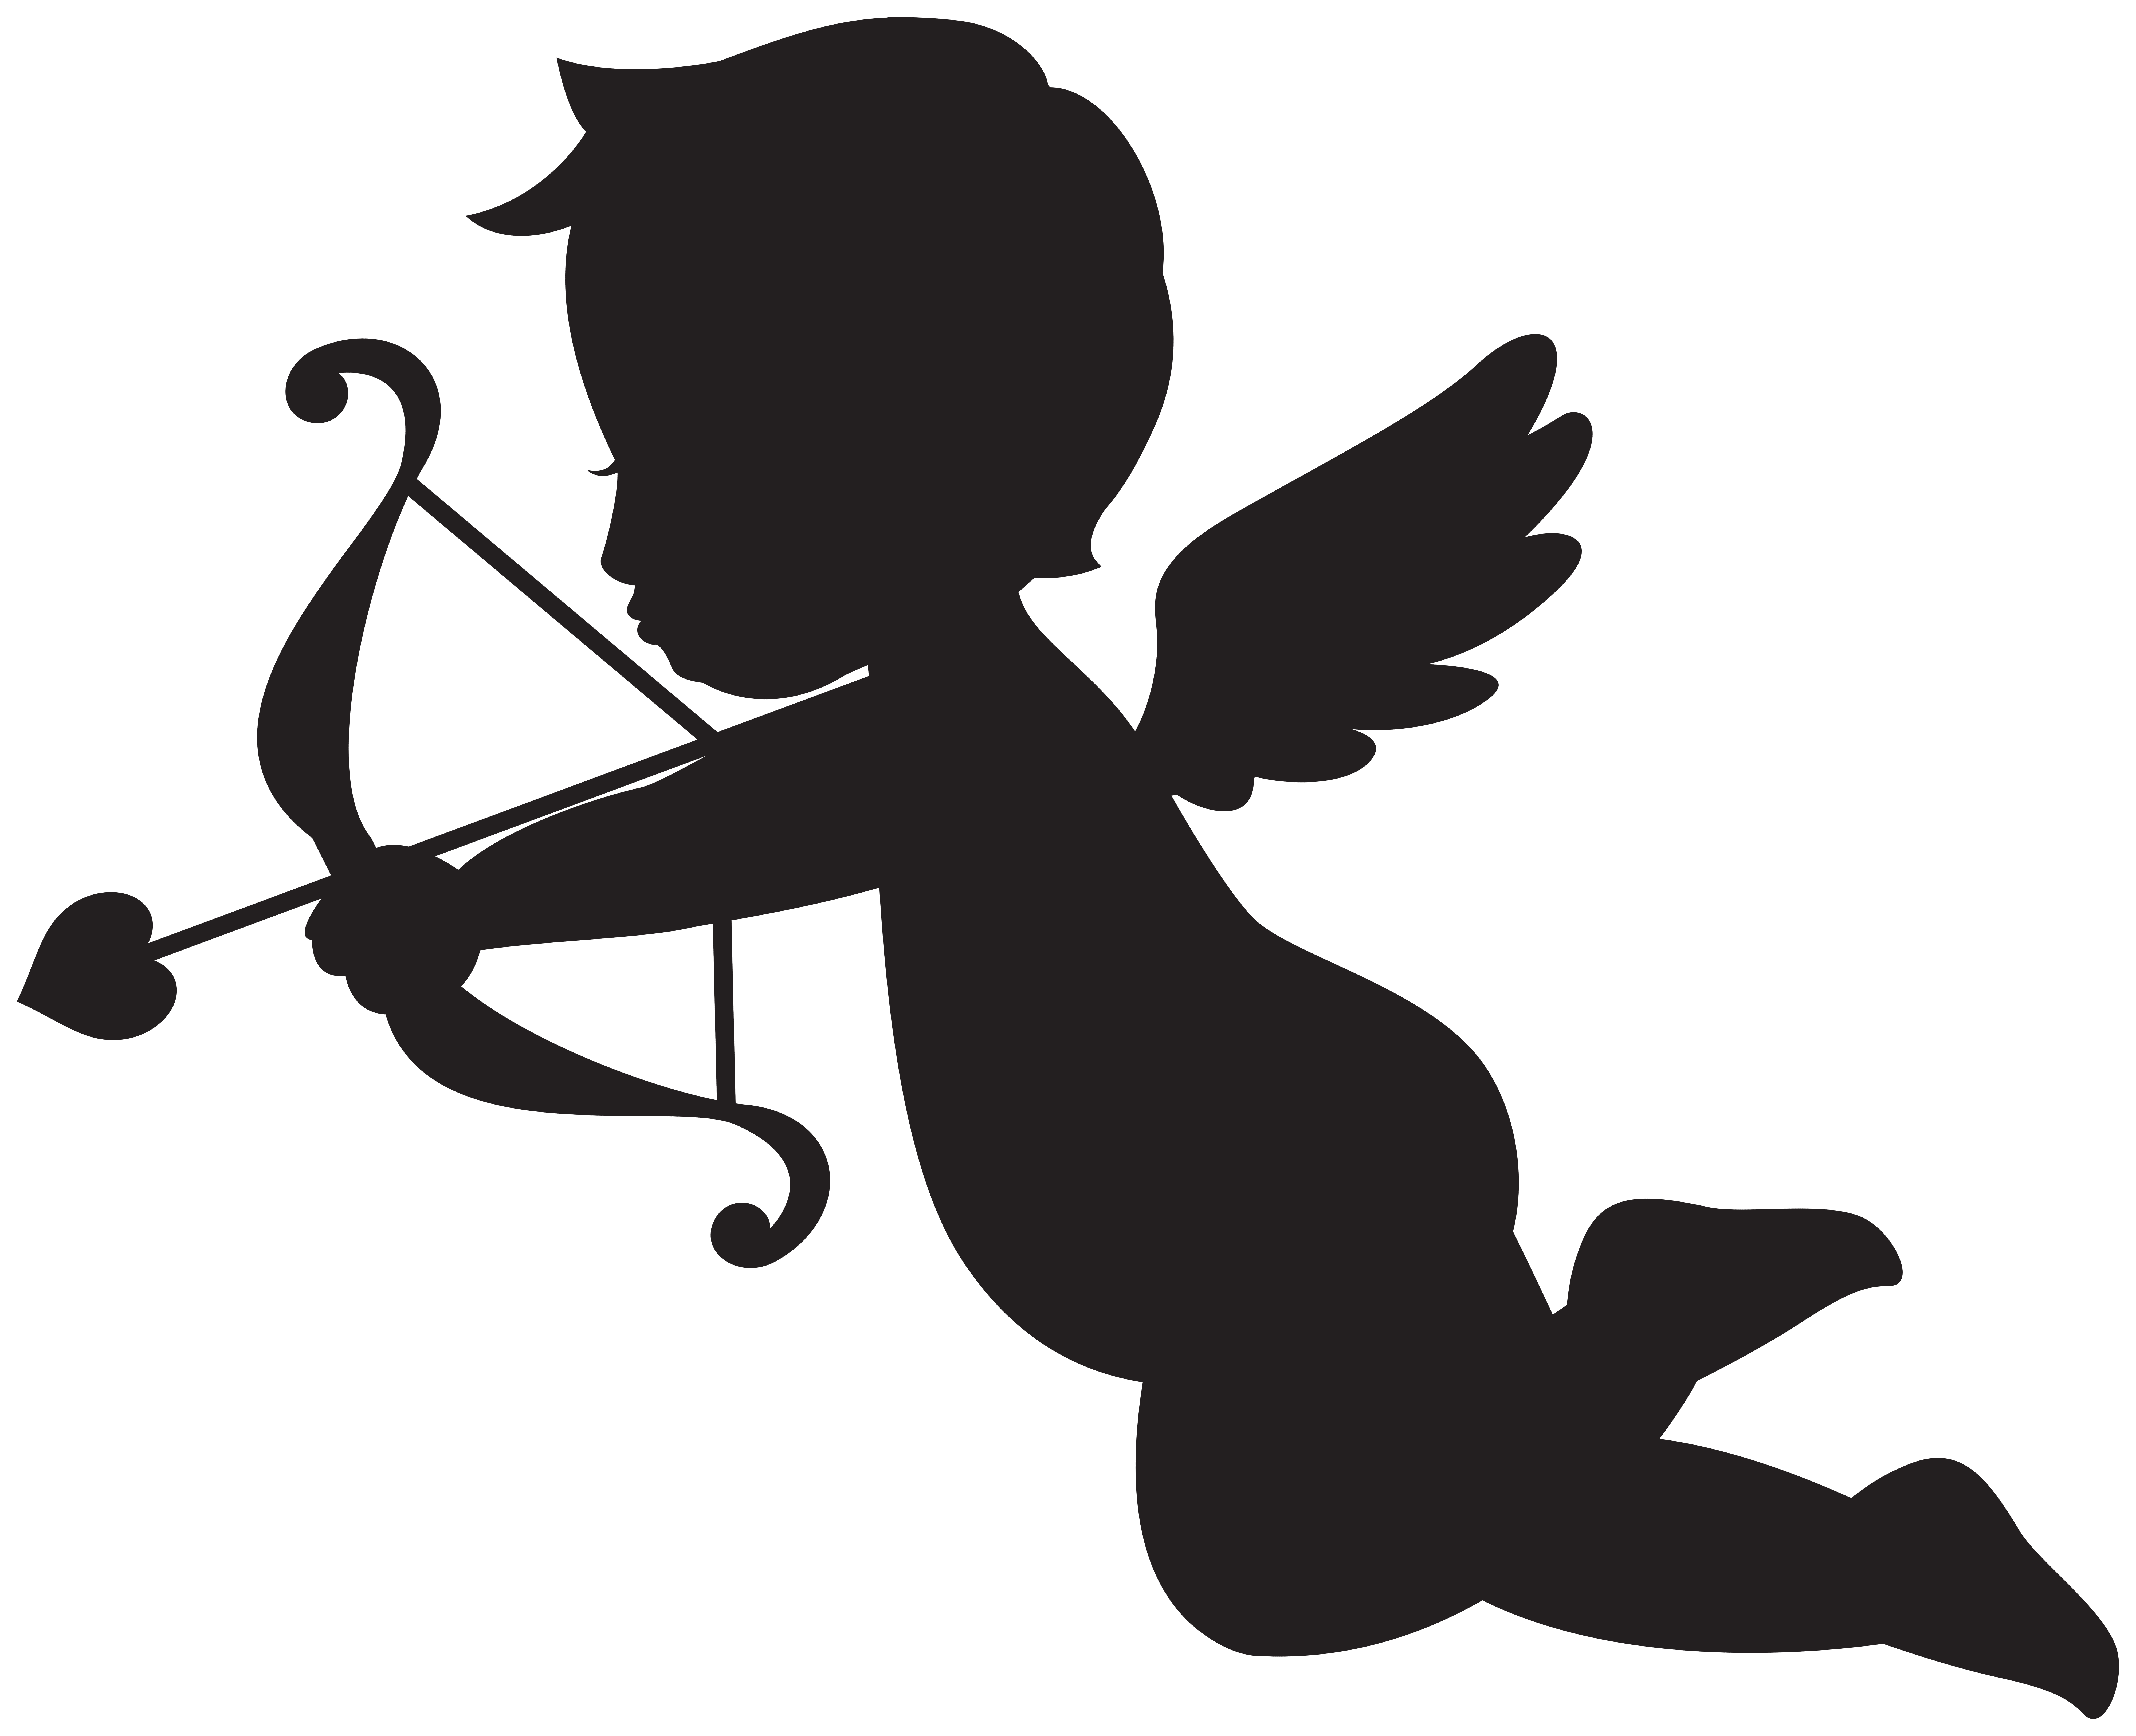 Clip Arts Related To : cupid clip art. view all cupid-clip-art). 